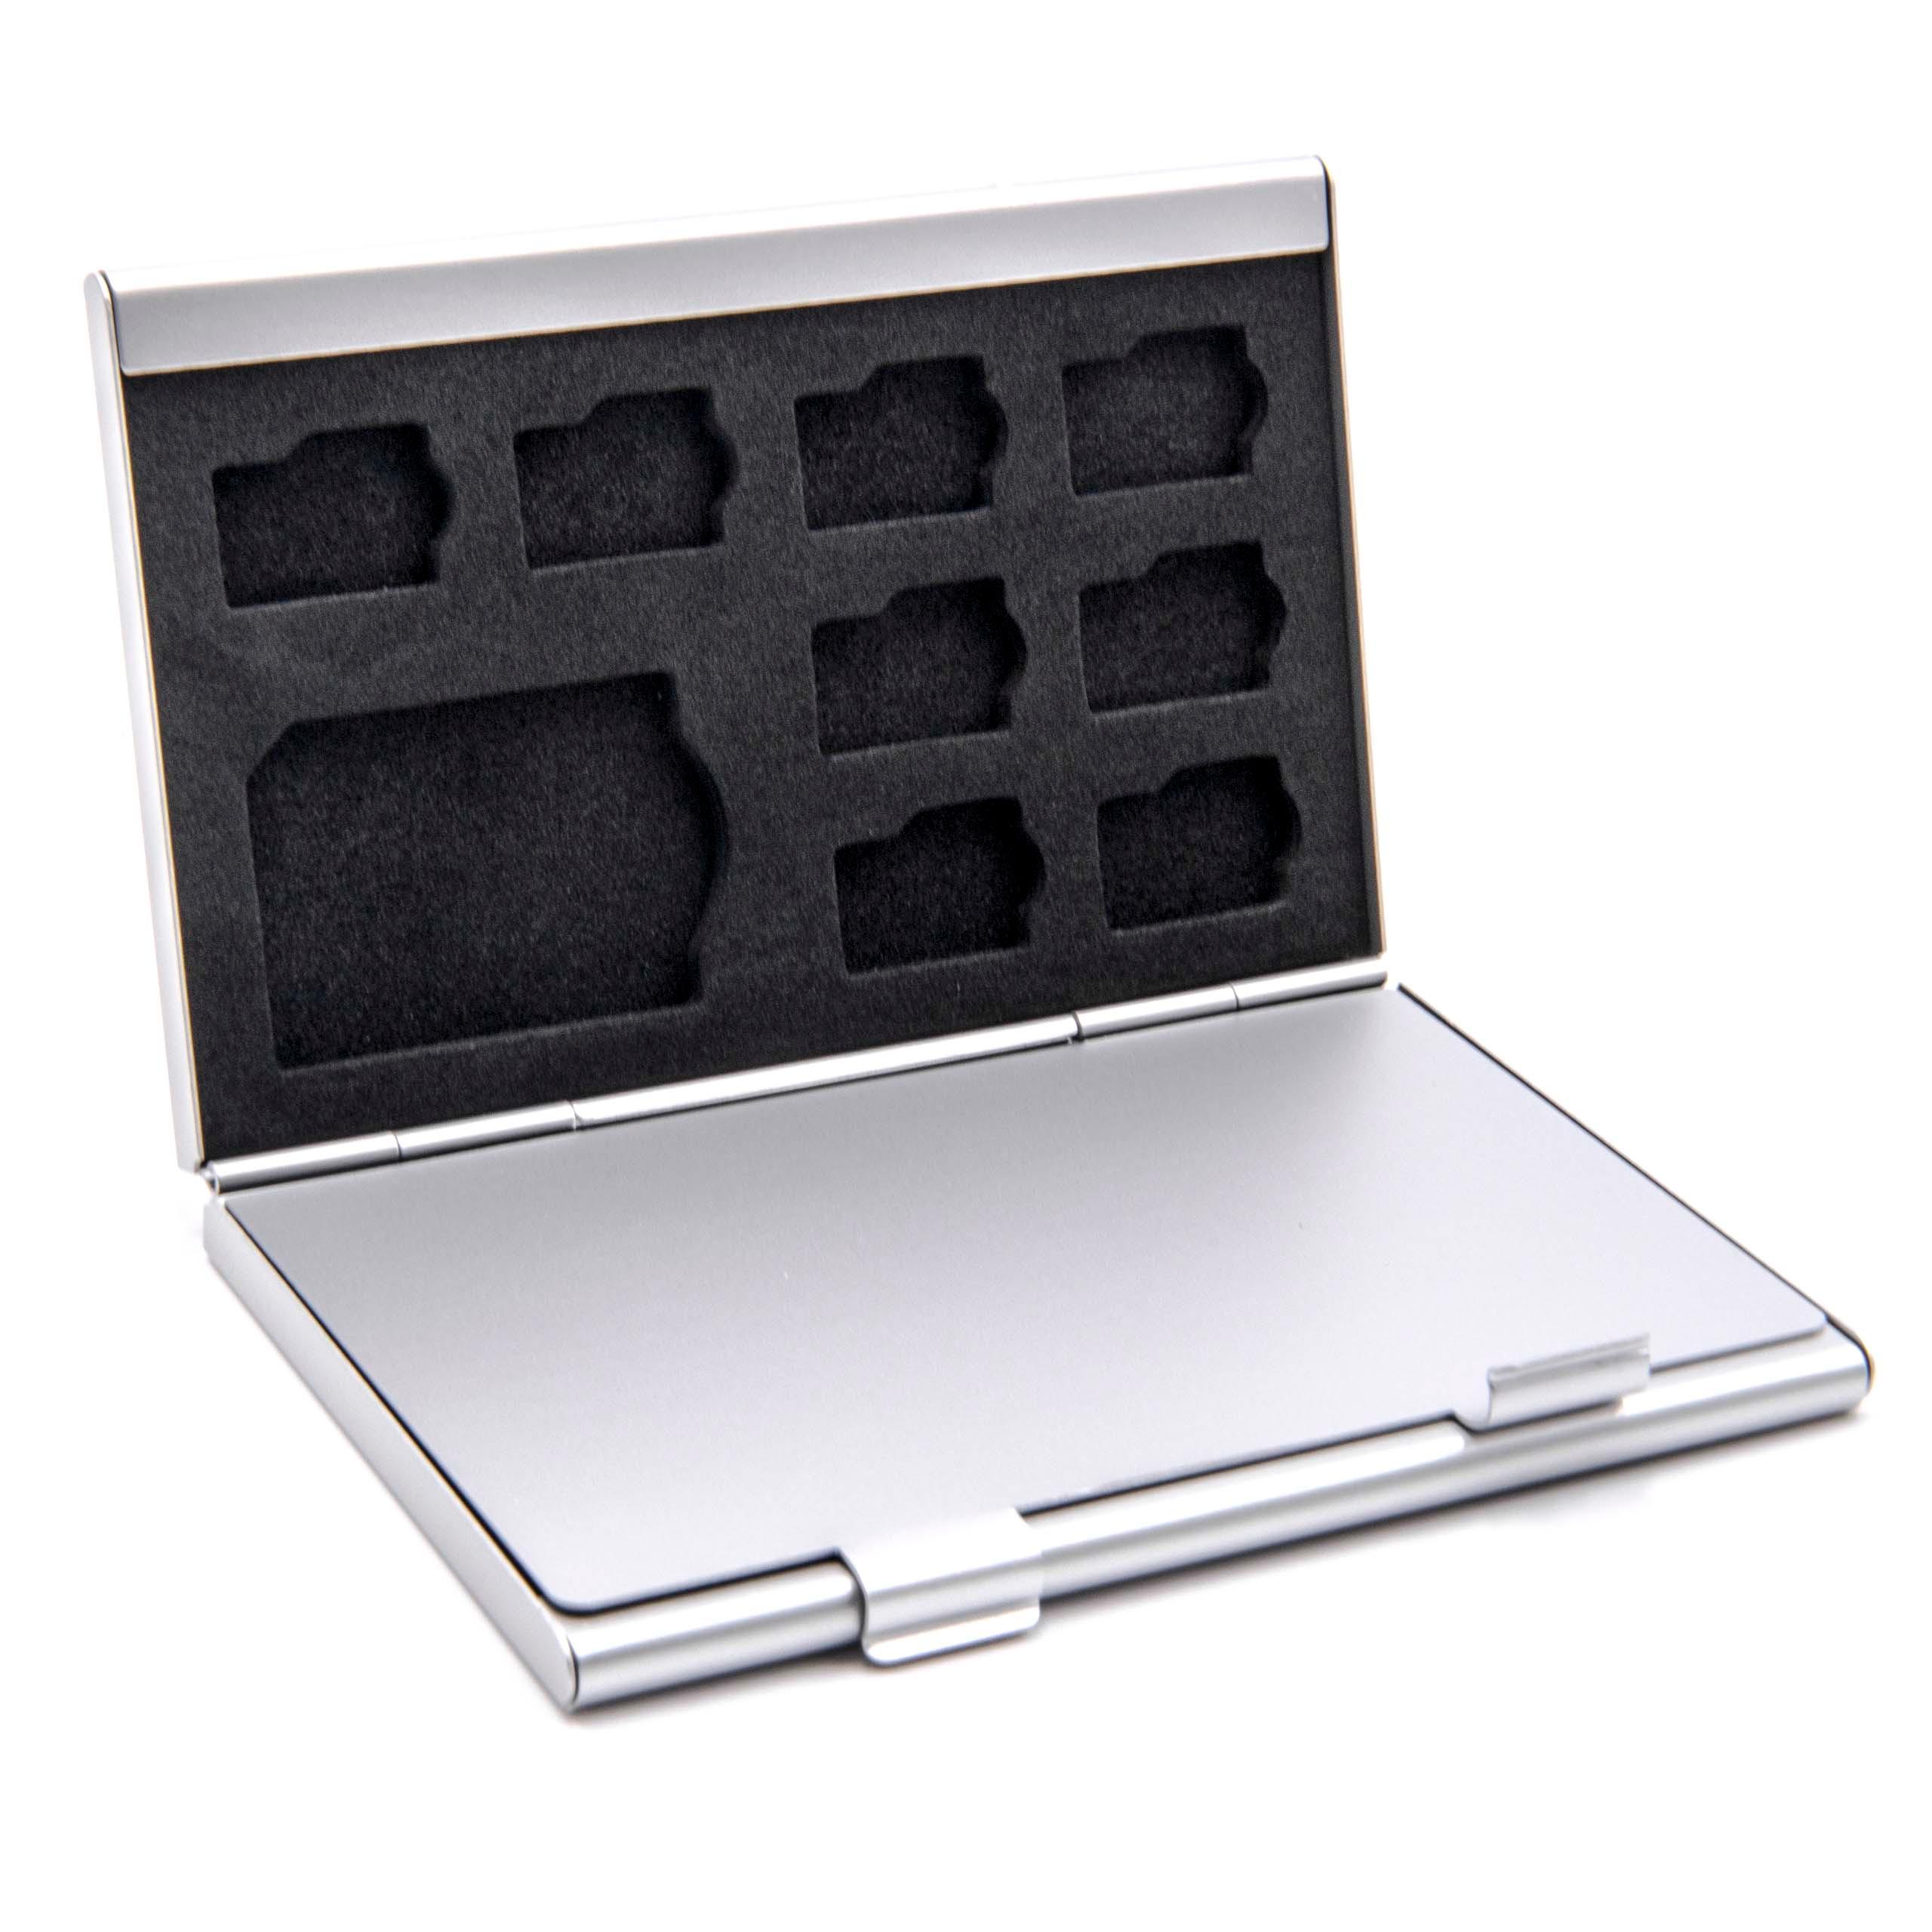 Carrying Case suitable for memory cards 16x microSD - aluminium, silver